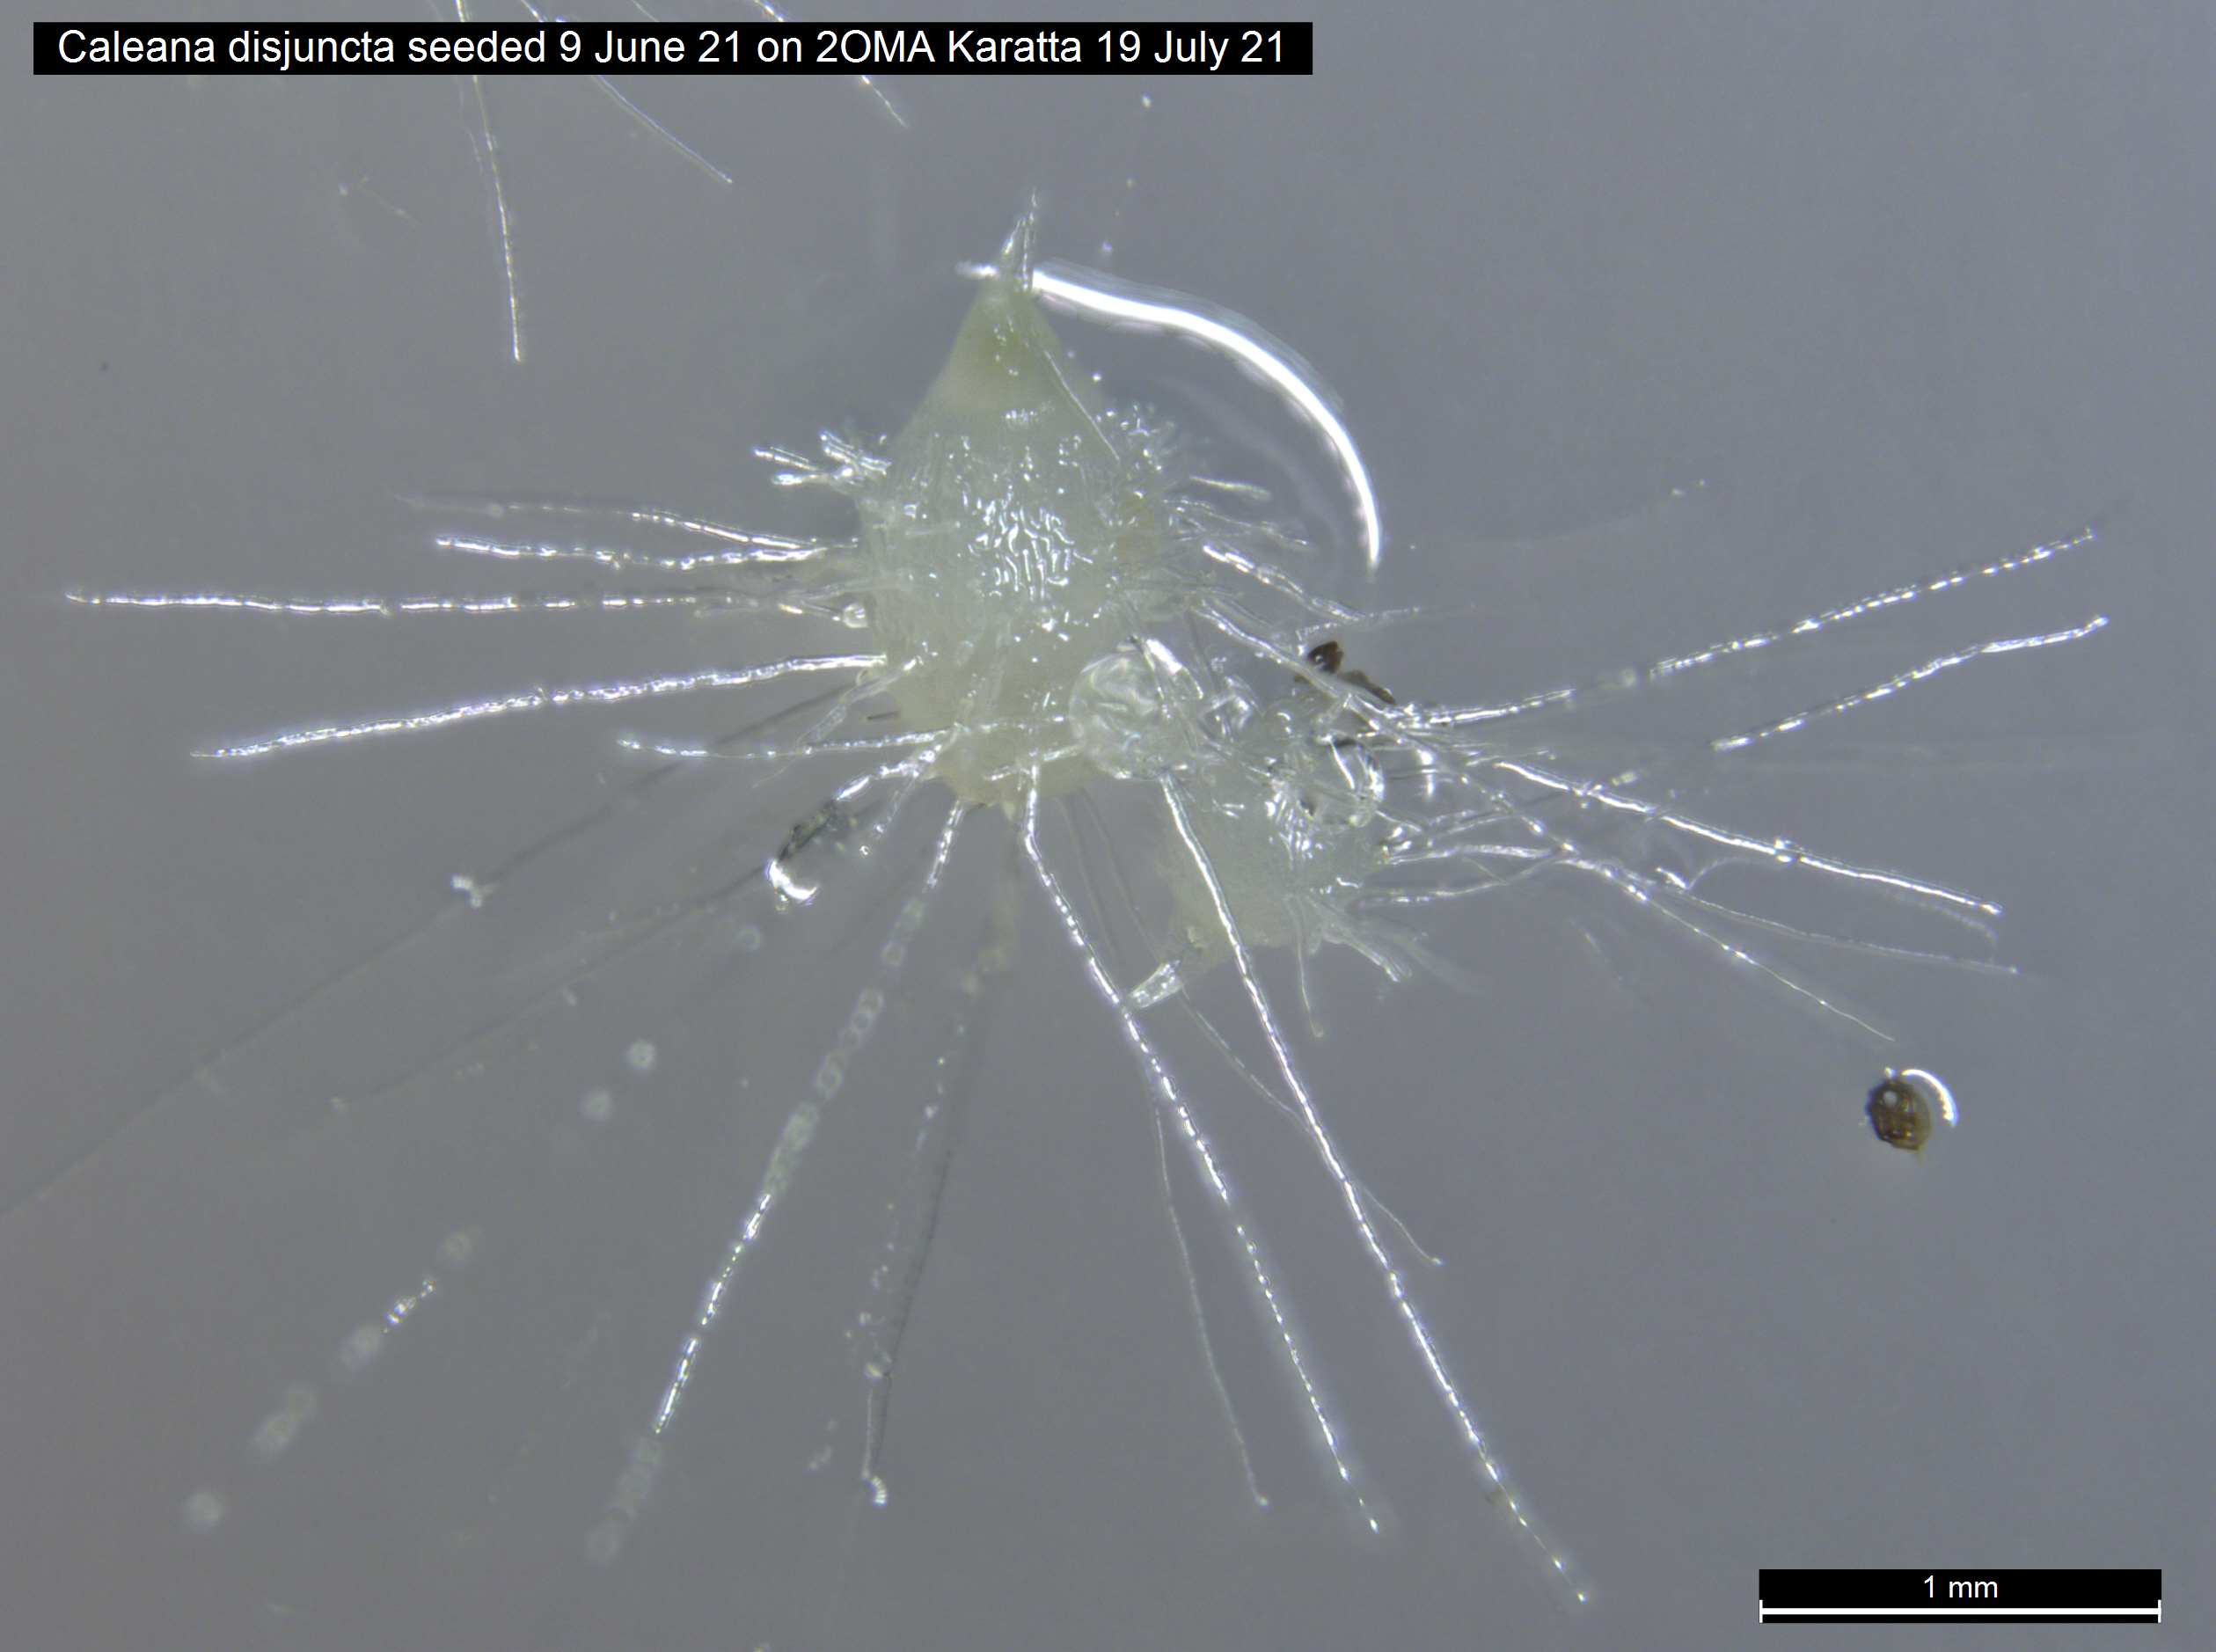 Magnified image showing the tear drop shaped seed of Caleana disjuncta with fungal hyphae protruding